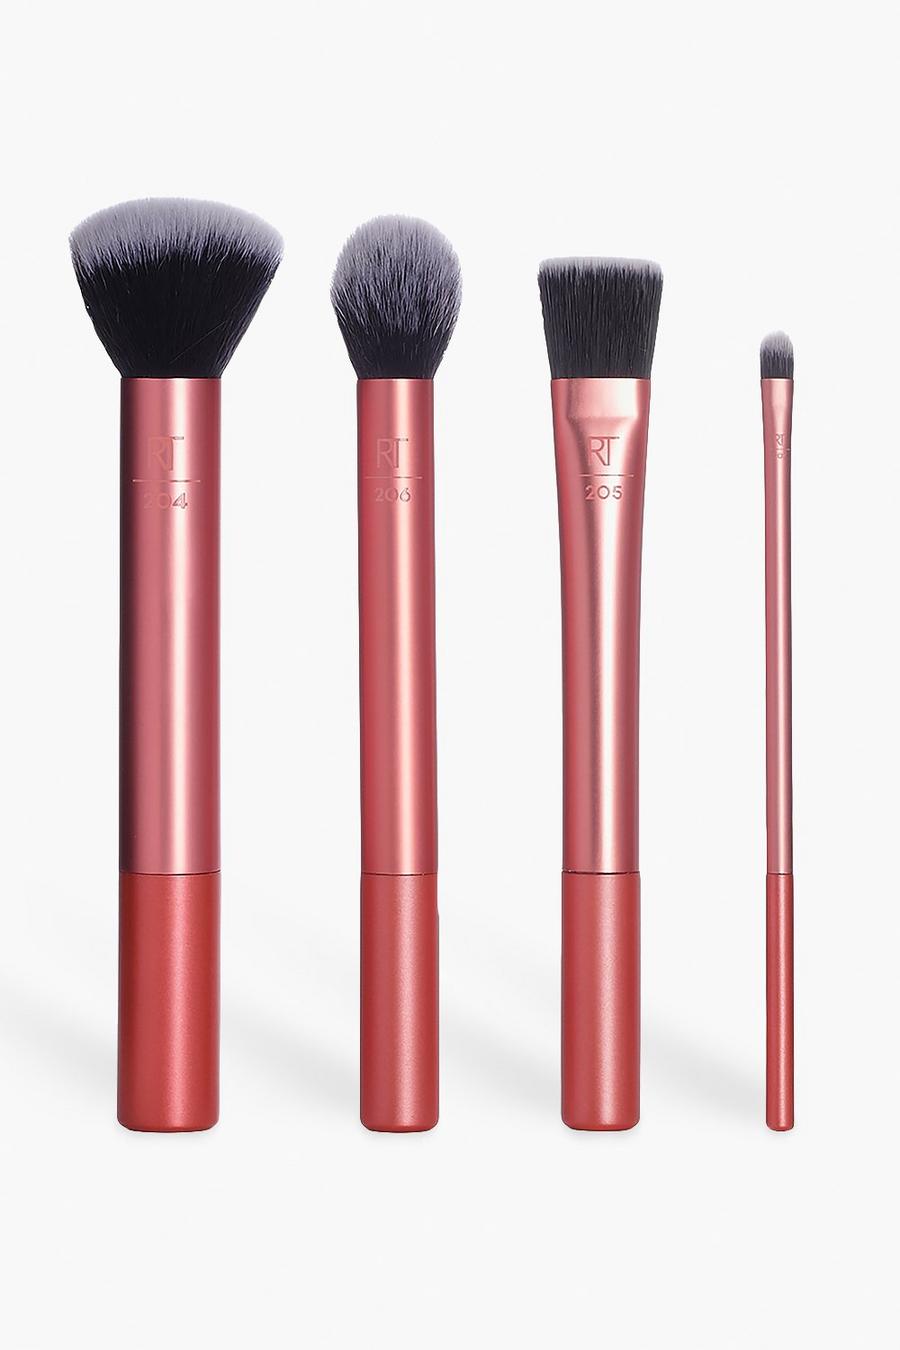 Rose gold metallizzato Real Techniques Flawless Base Brush Set